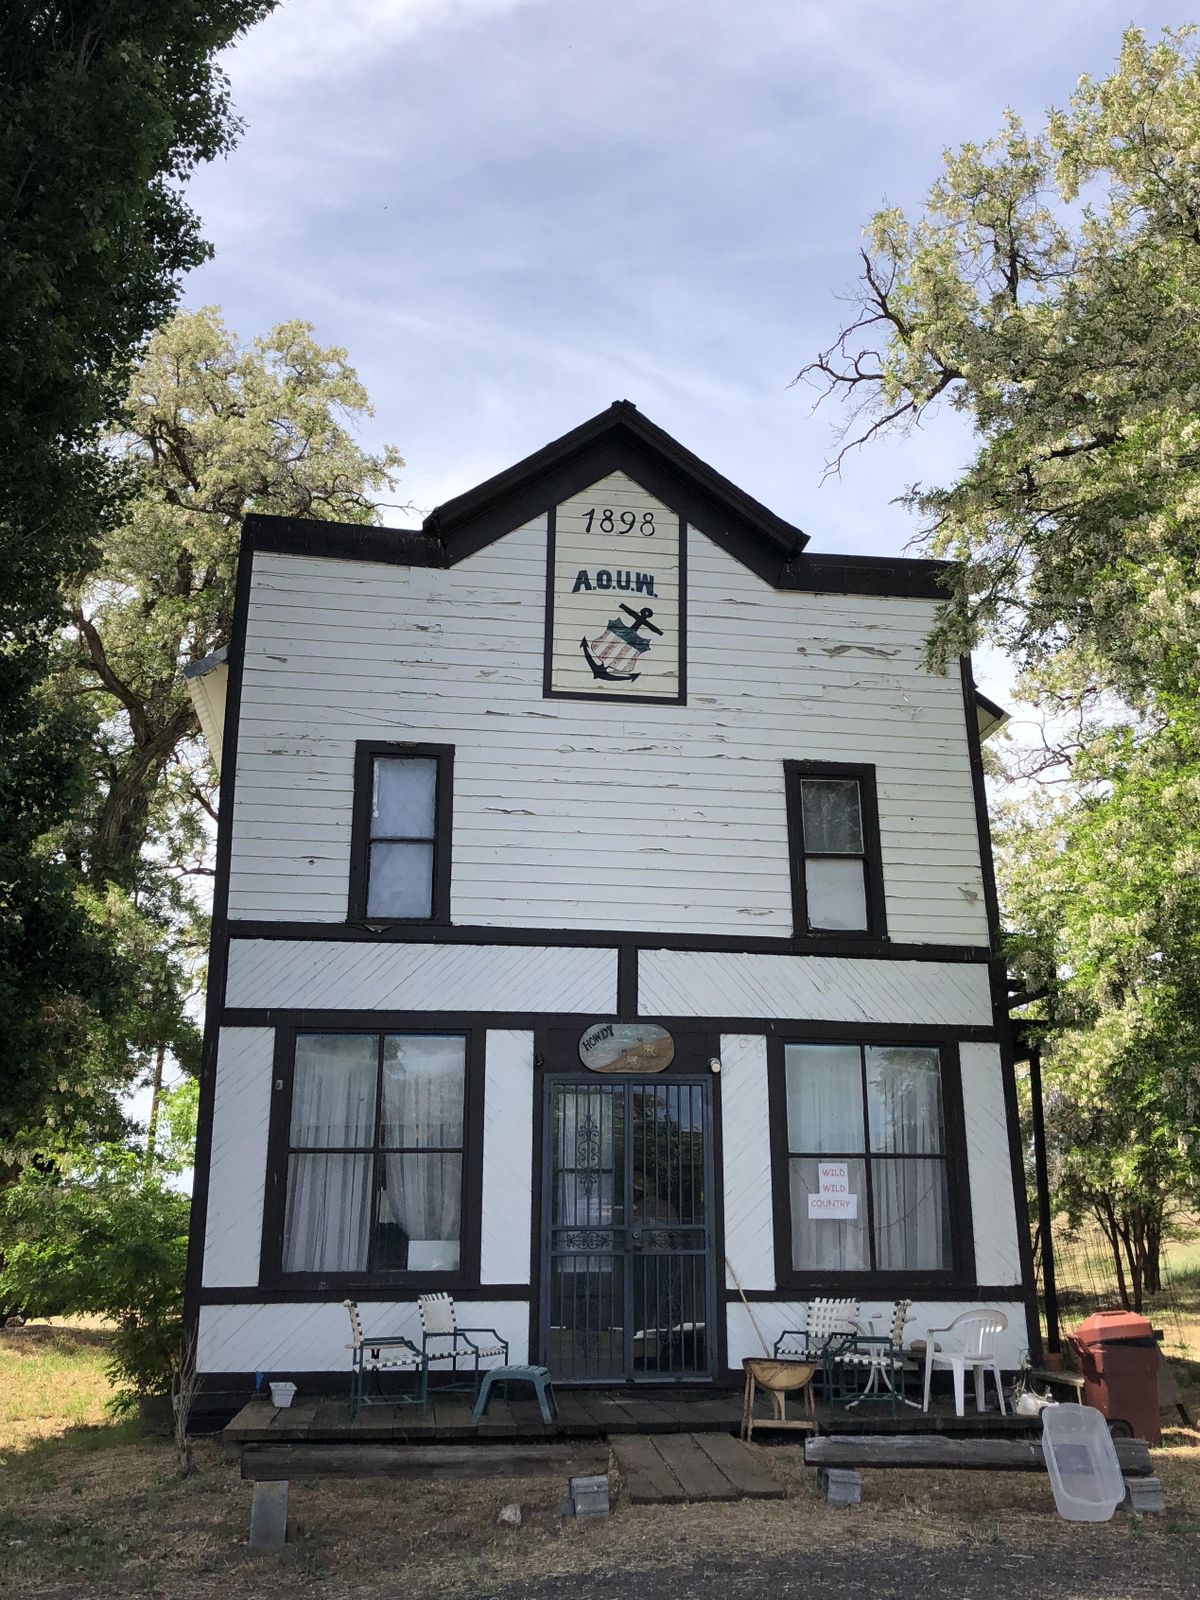 Barbara Beasley and Cody Flecker turned this 1898 building into a museum documenting the history of Antelope, Oregon. (Sophie Bress / The Spokesman-Review)